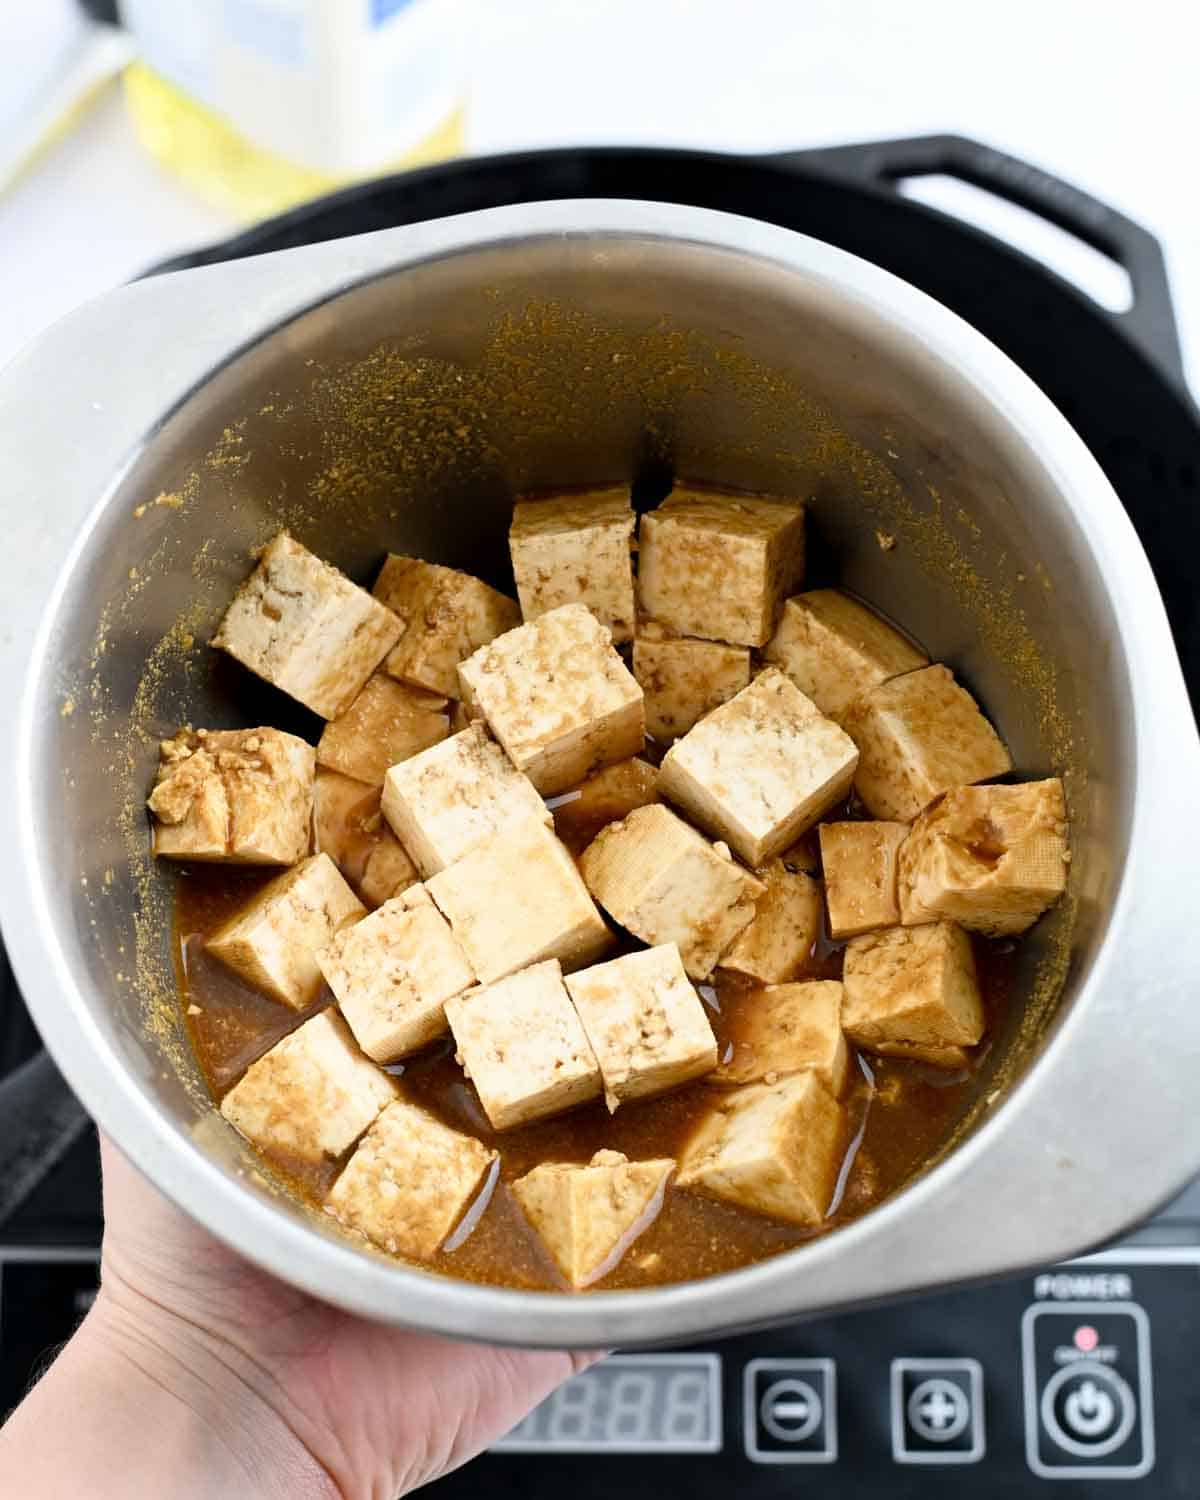 Cubed tofu in a brown marinade in a metal bowl.